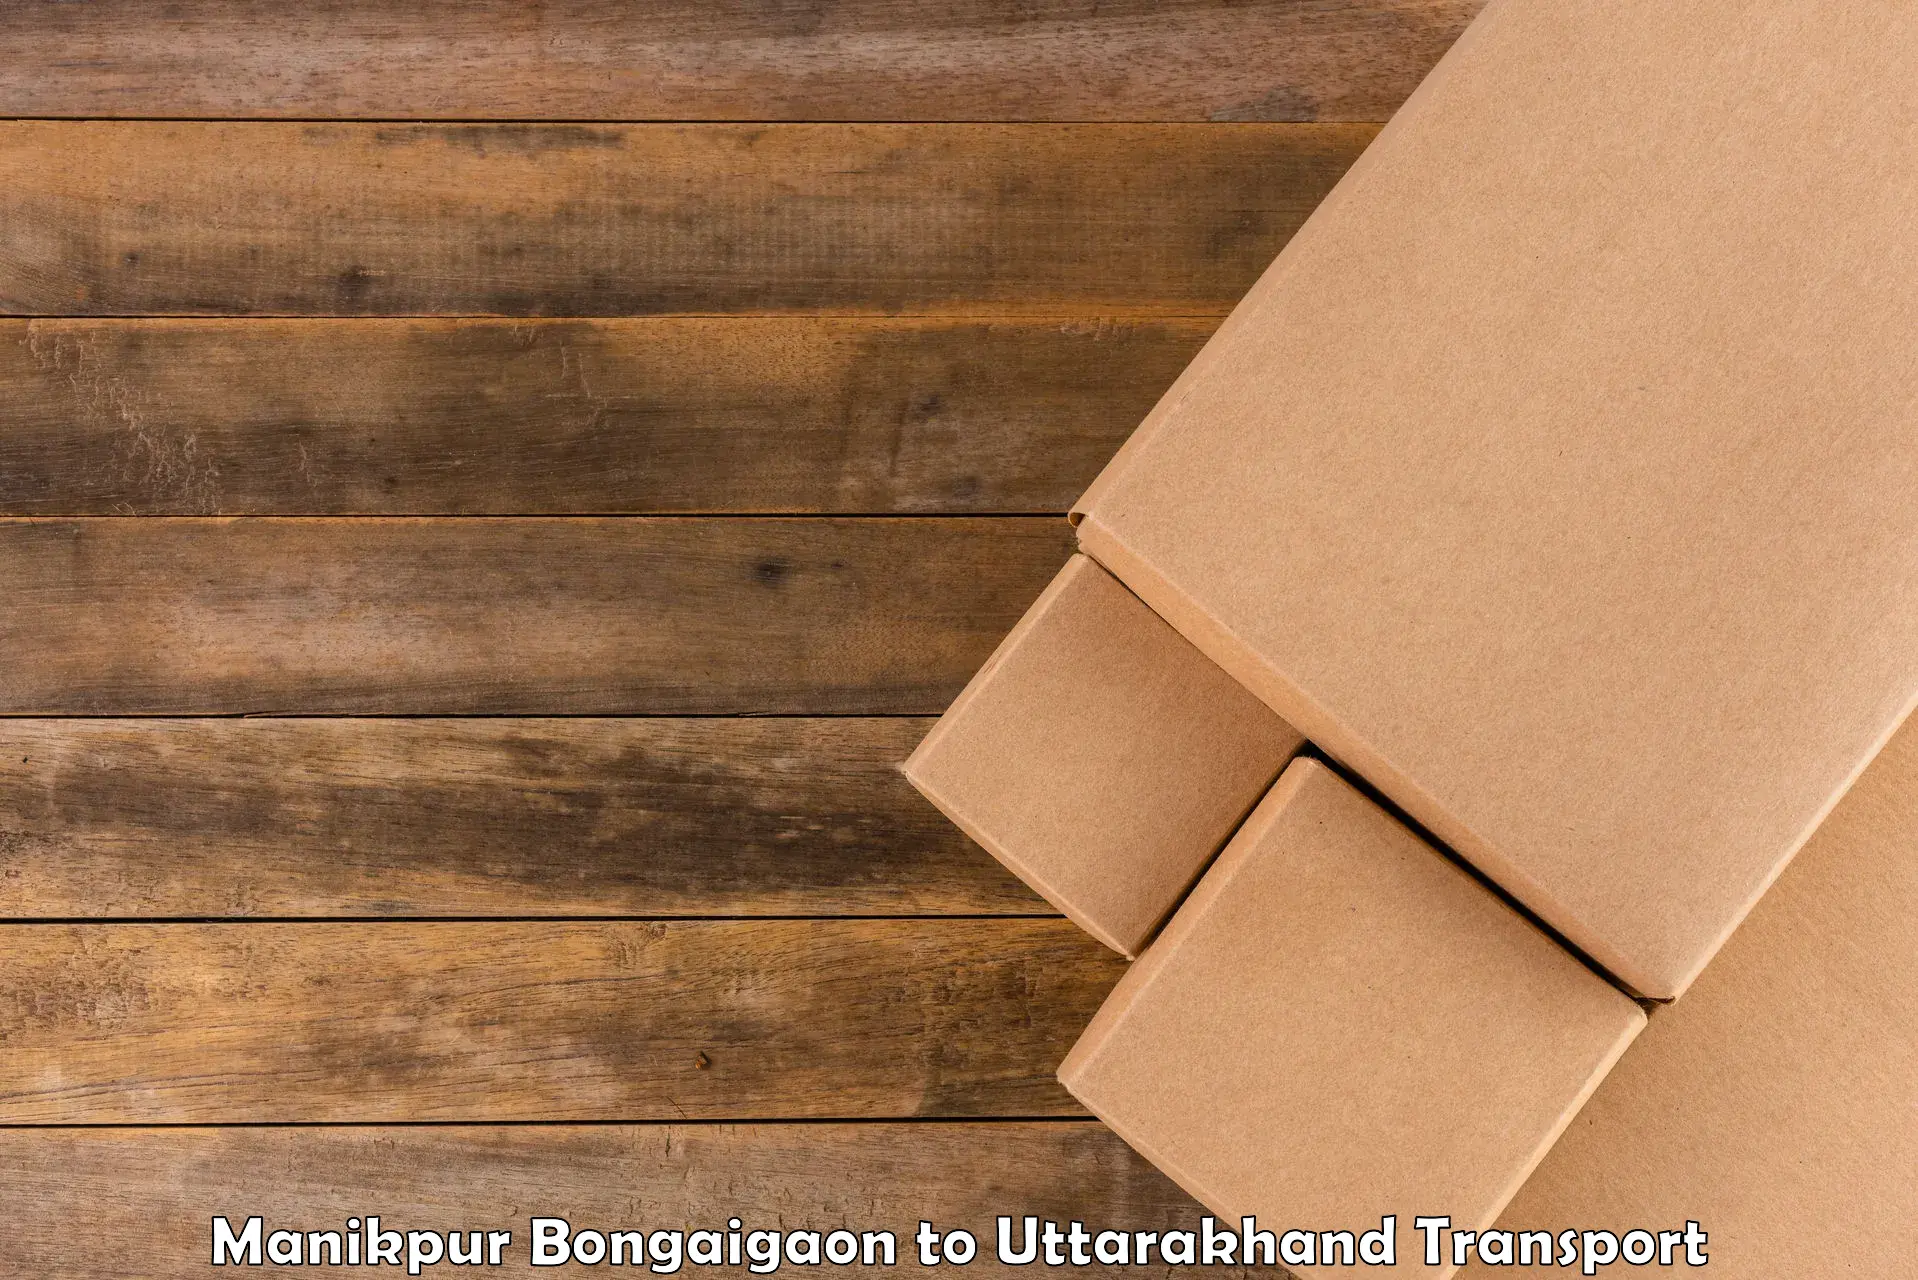 Vehicle transport services in Manikpur Bongaigaon to Mussoorie